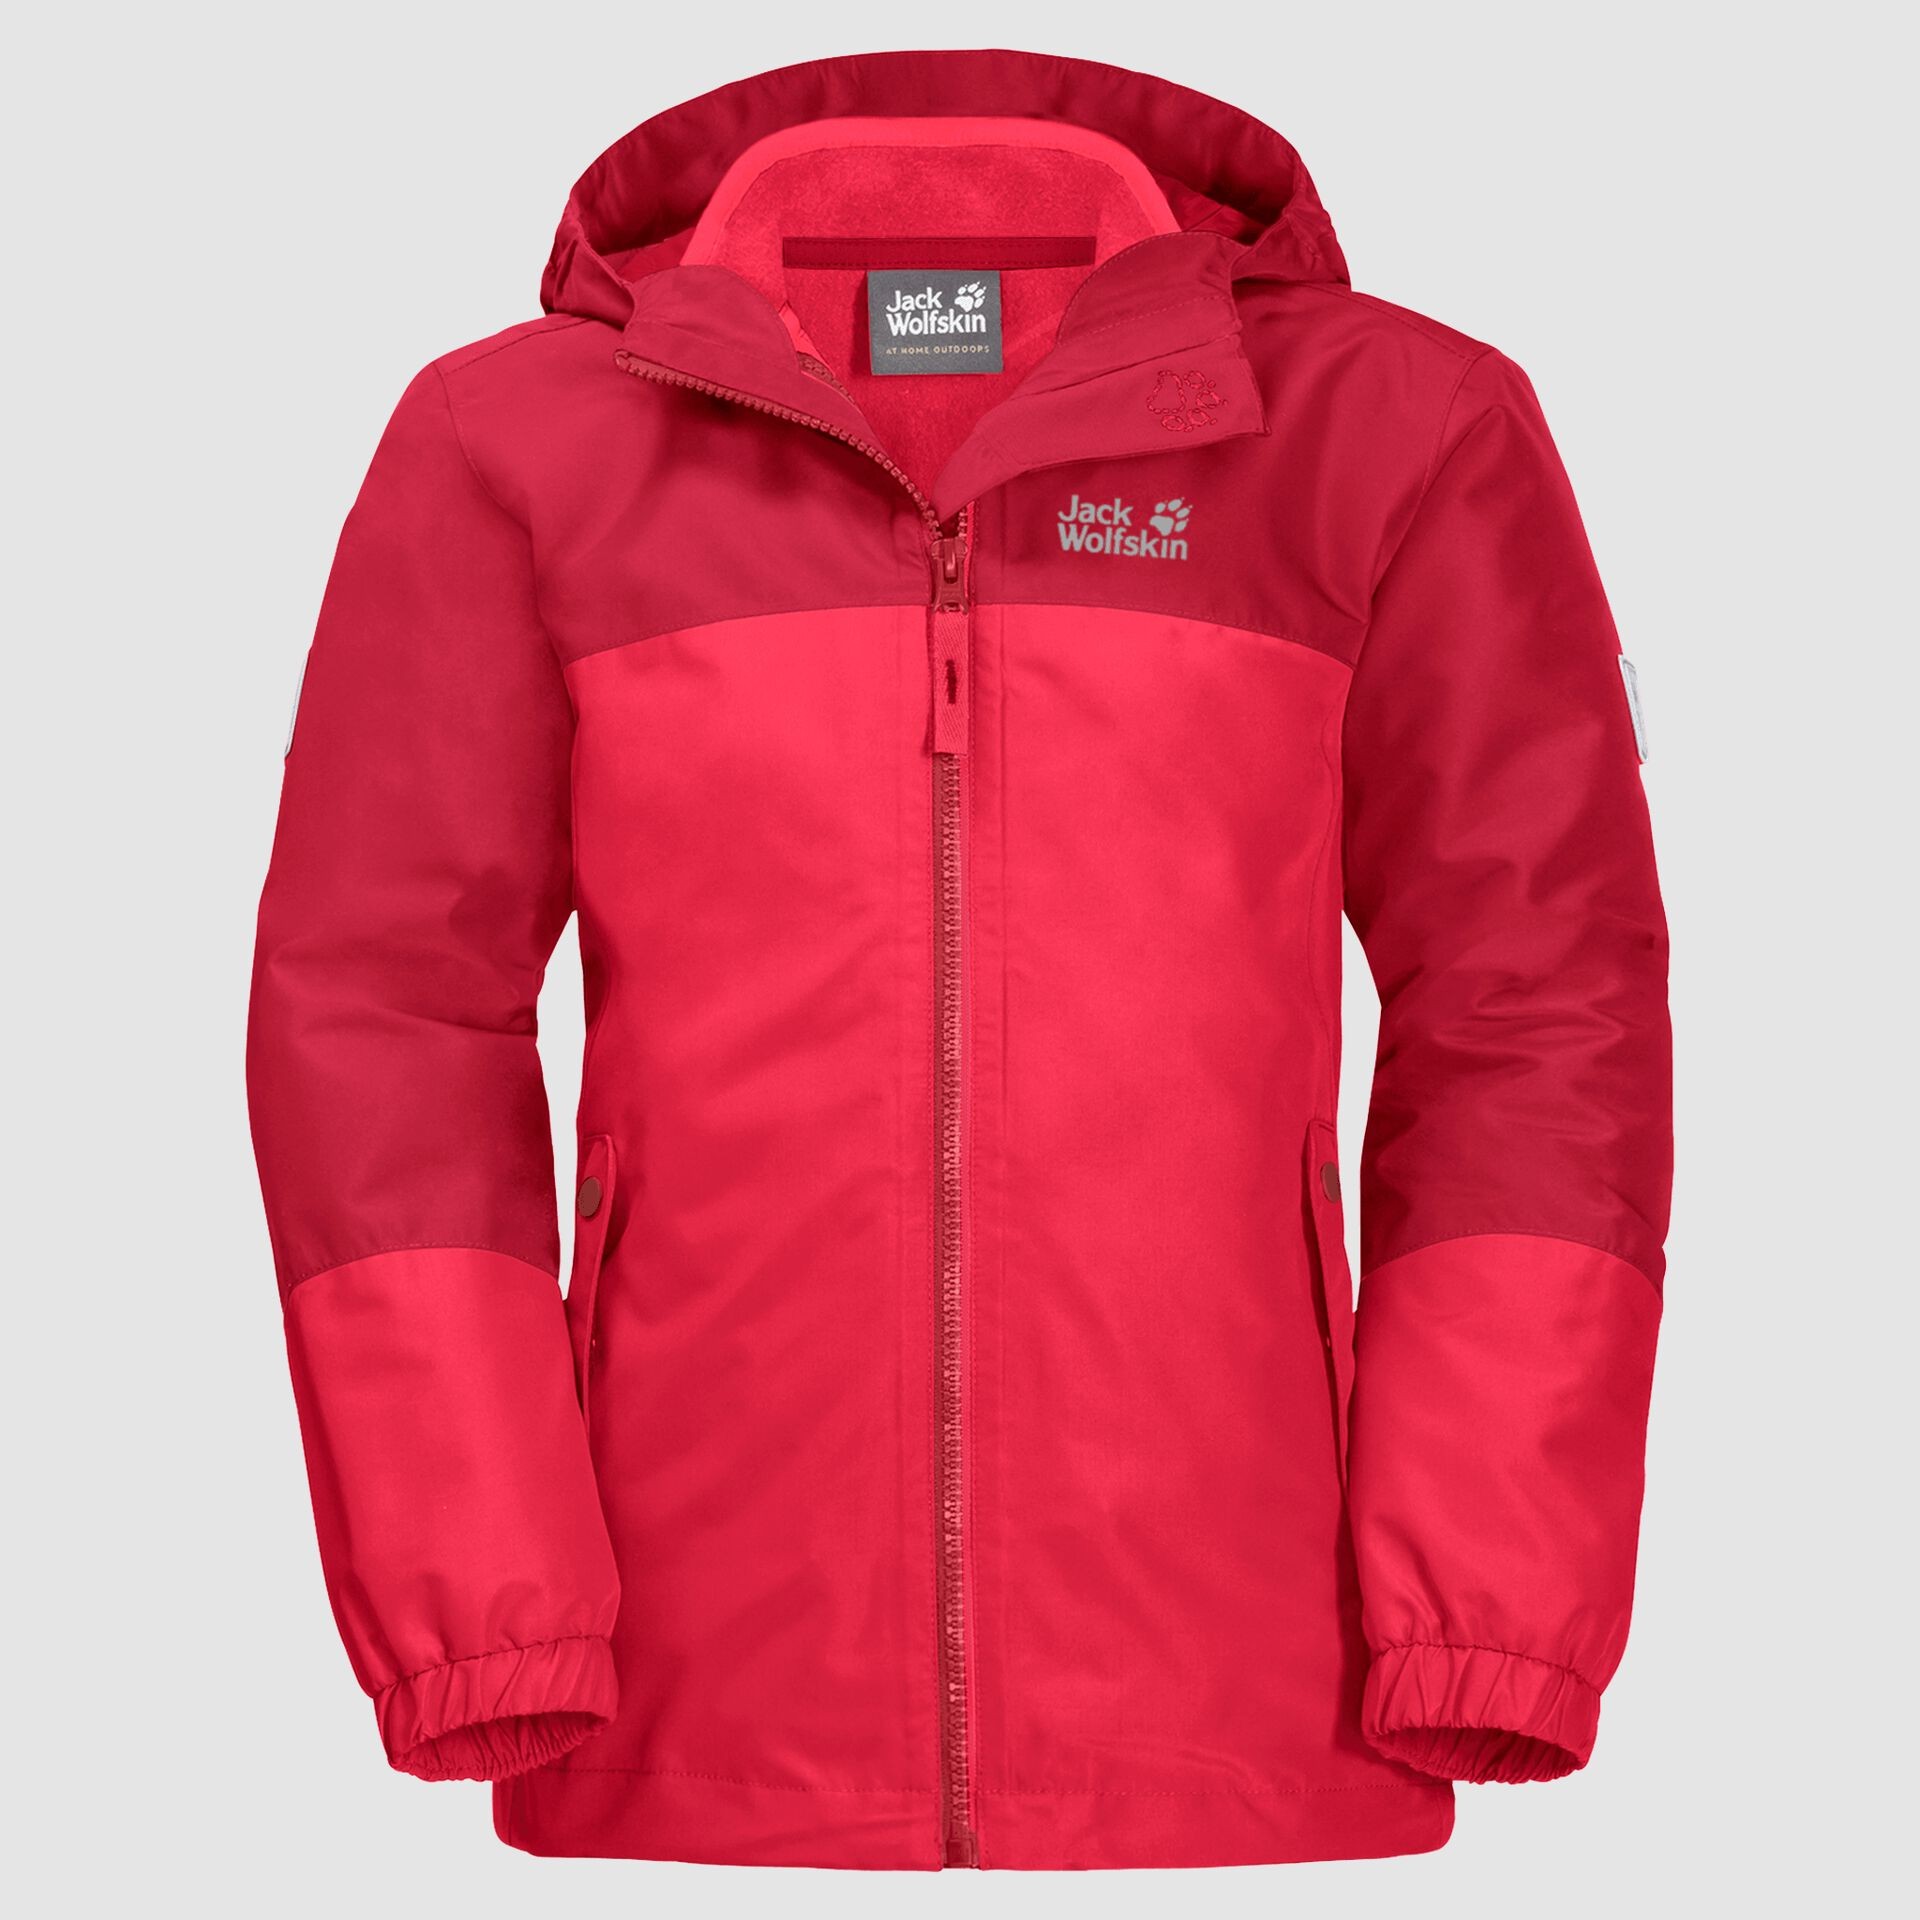 Kids Iceland 3in1 Jacket 92-152, tulip red